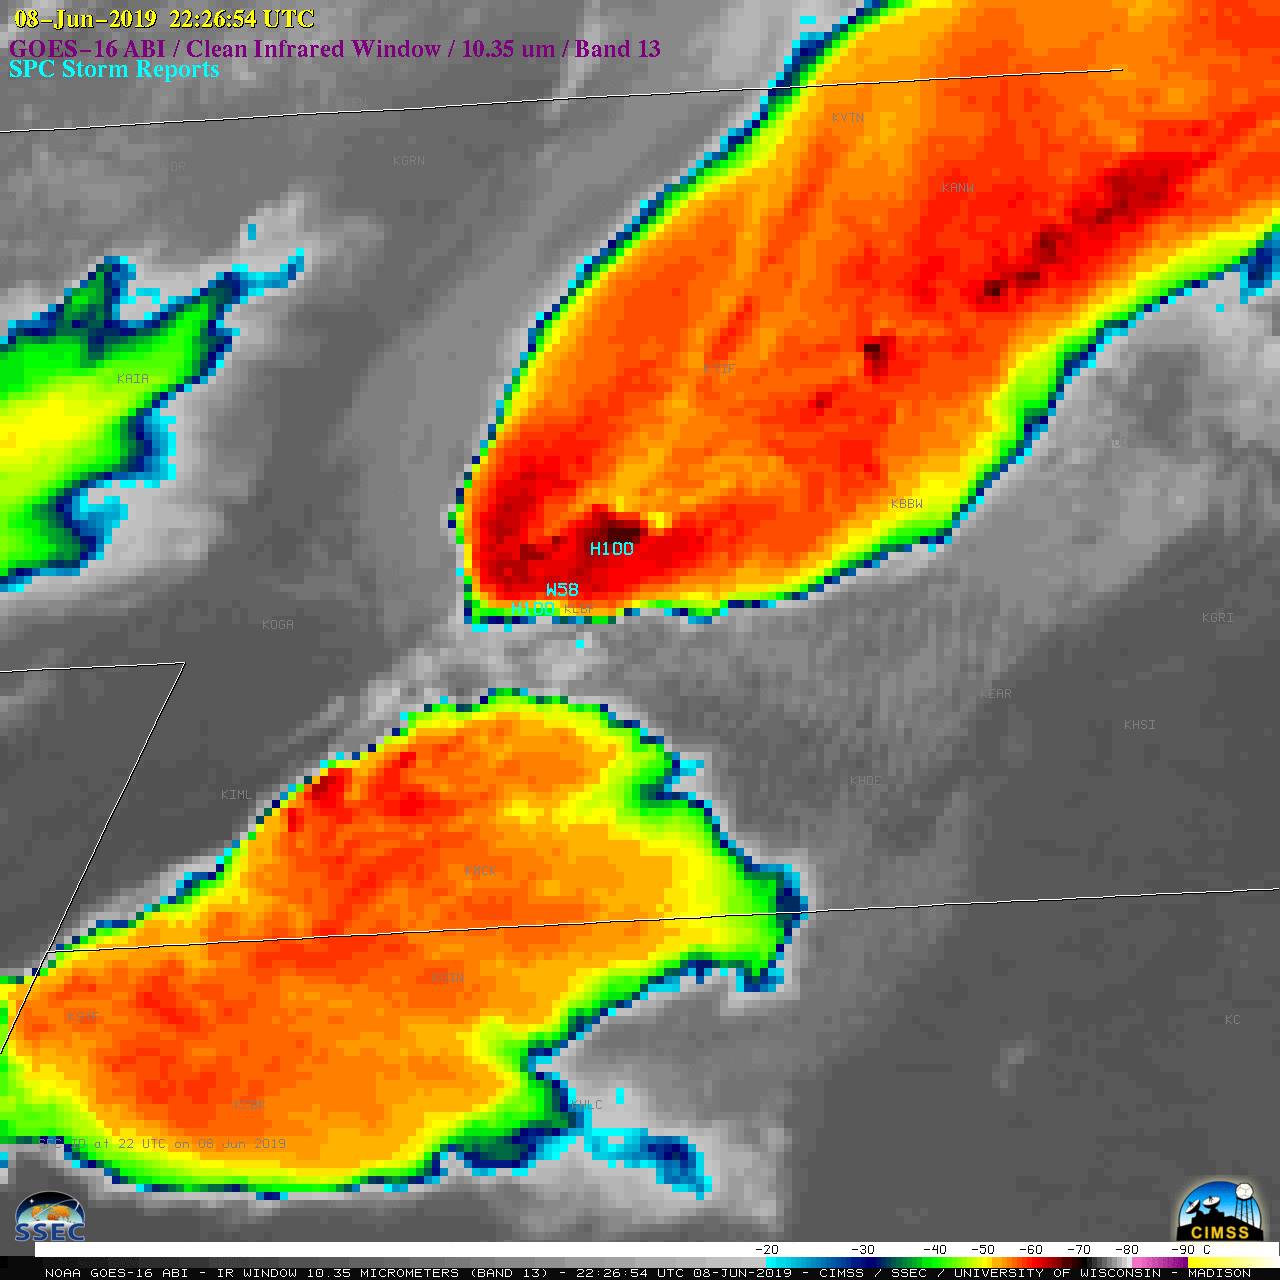 GOES-16 "Clean" Infrared Window (10.35 µm) images, with SPC Storm Reports plotted in cyan [click to play MP4 animation | 159 MB animated GIF]